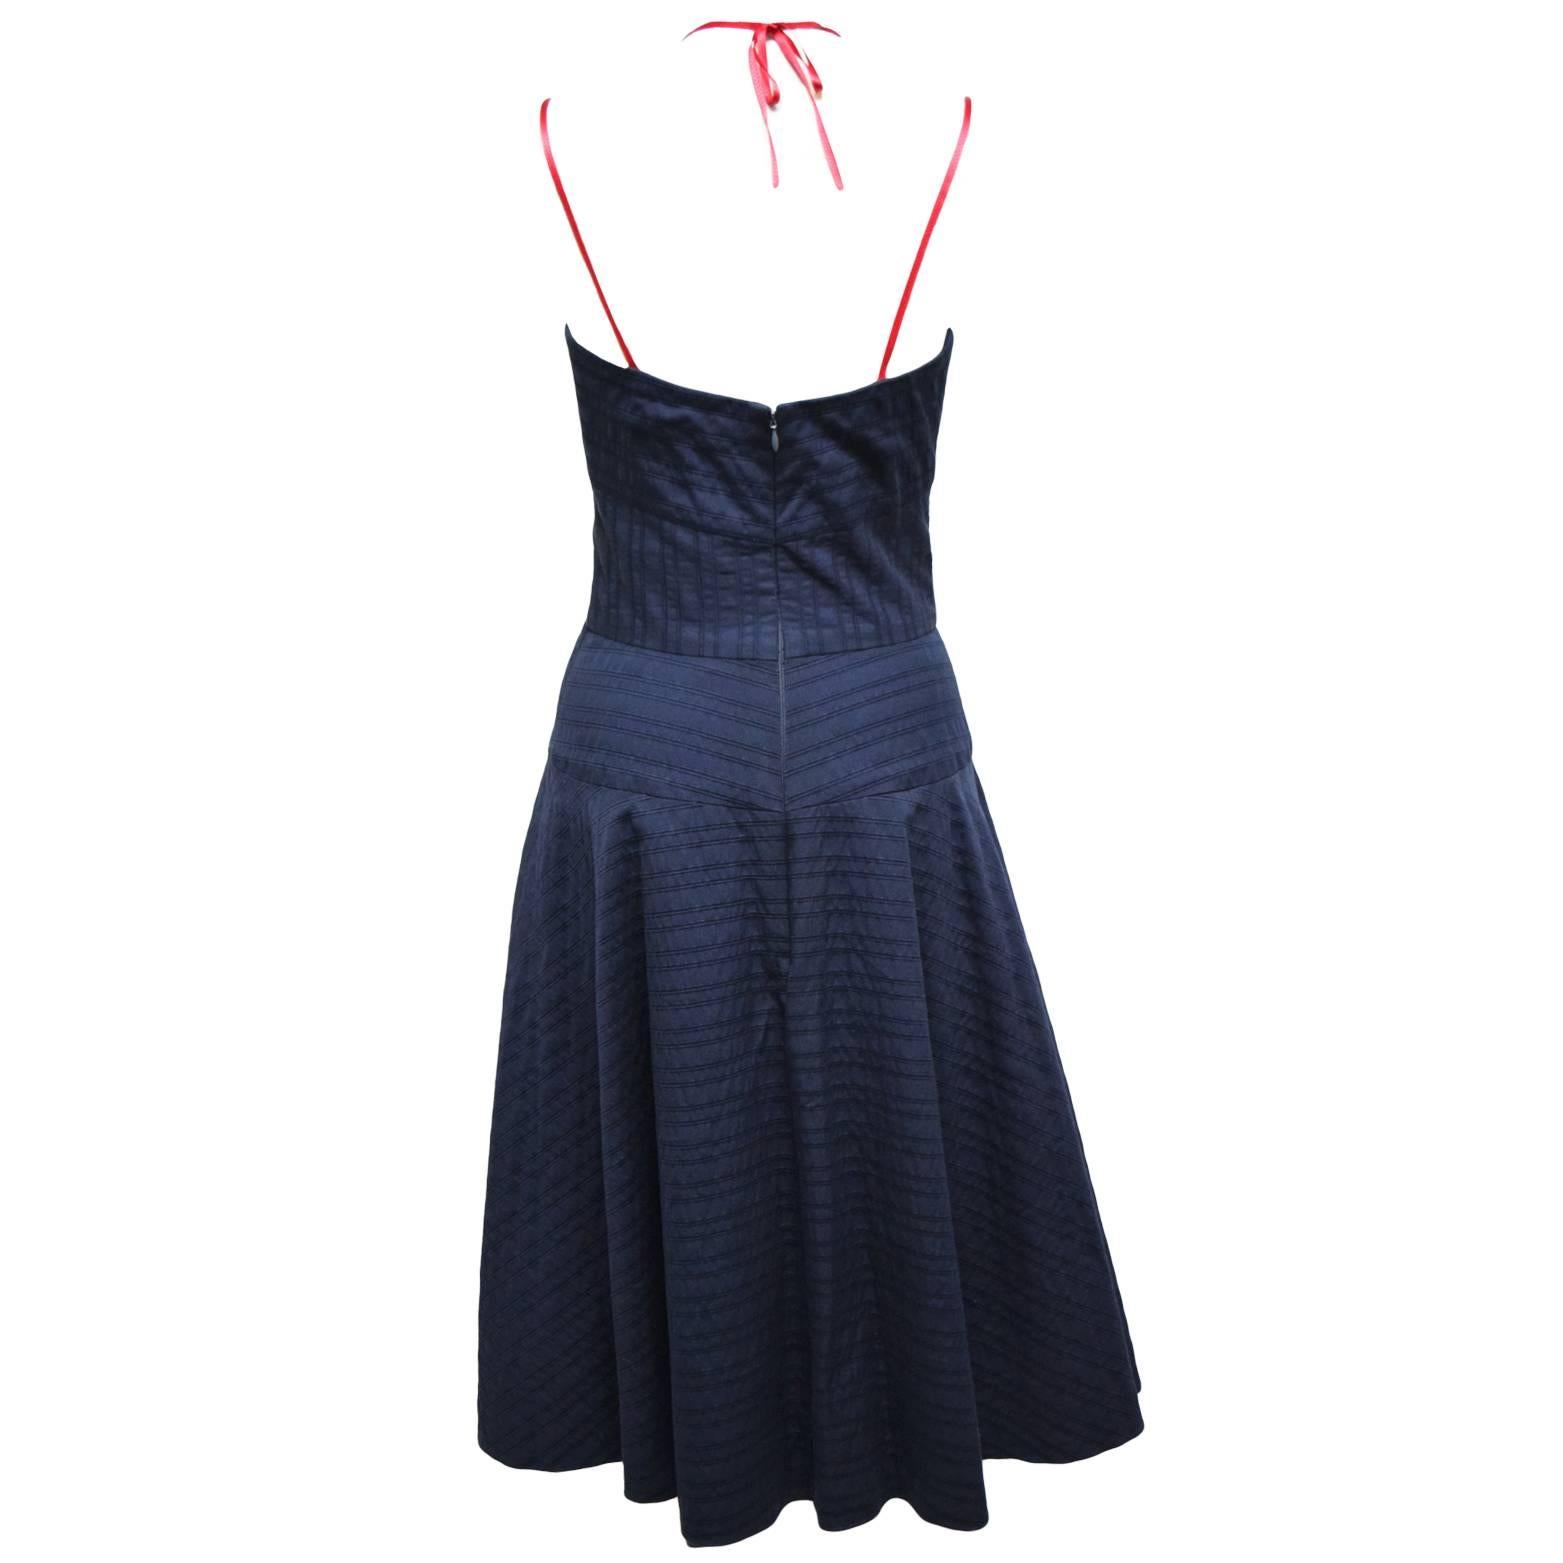 This dress by Carolina Herrera is a fun playful sweetheart bust dress with a flared skirt. Pleating details are throughout the whole dress. The straps are gross grain red ribbon and create a halter silhouette.